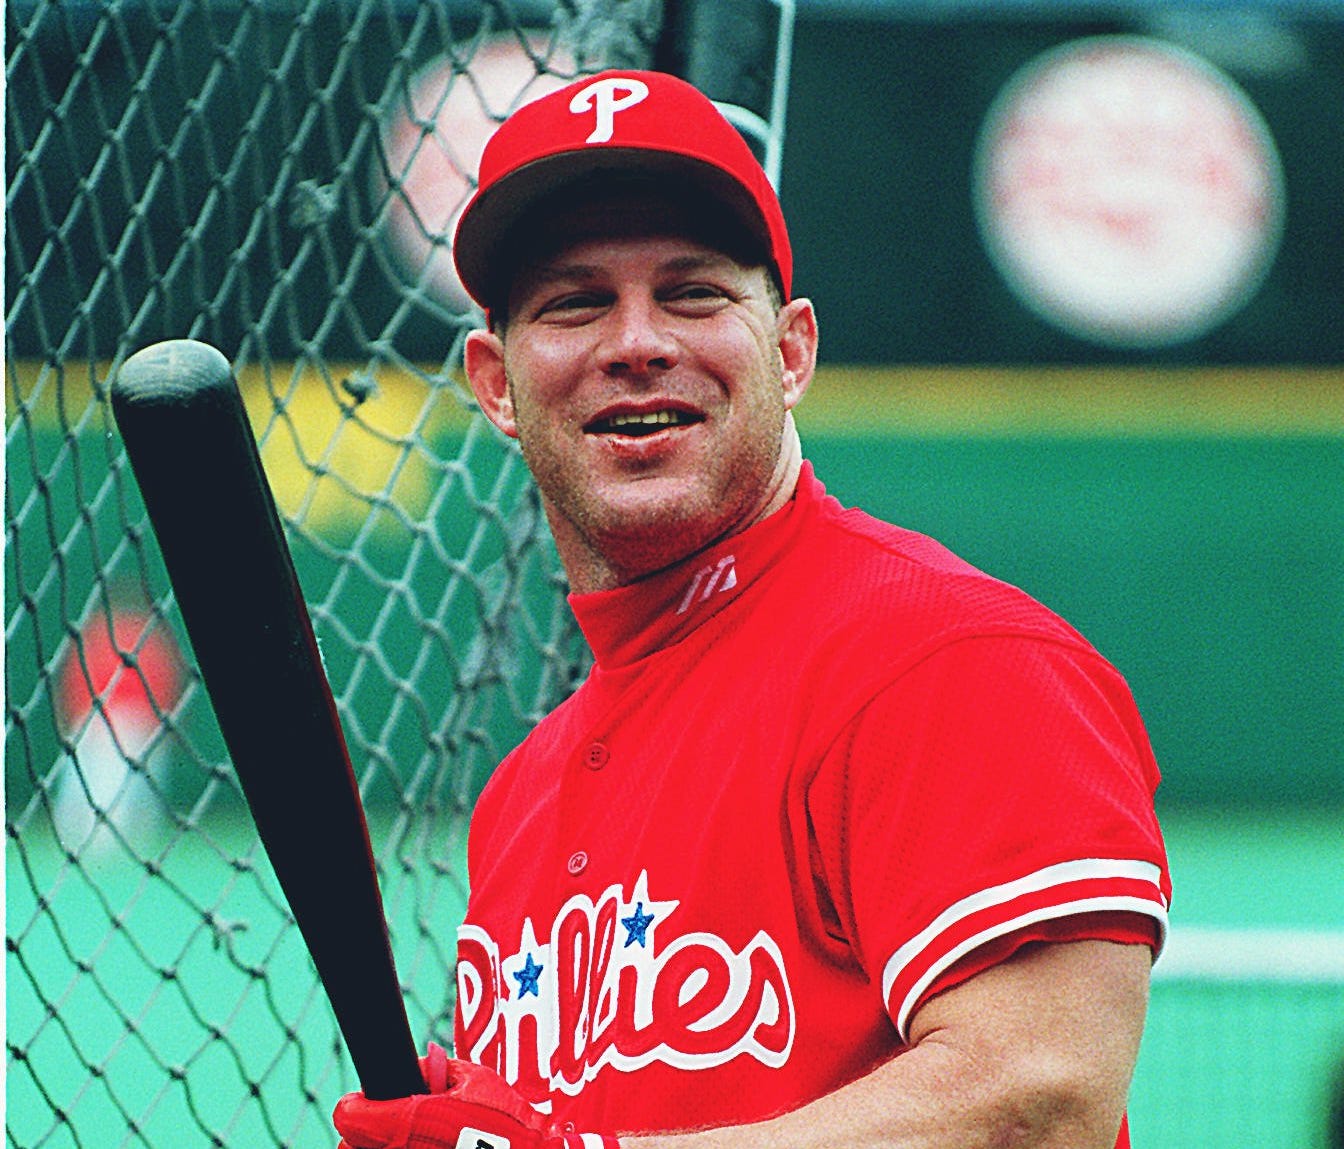 Lenny Dykstra posted a Facebook video on Monday where he remembered teammate Darren Daulton.